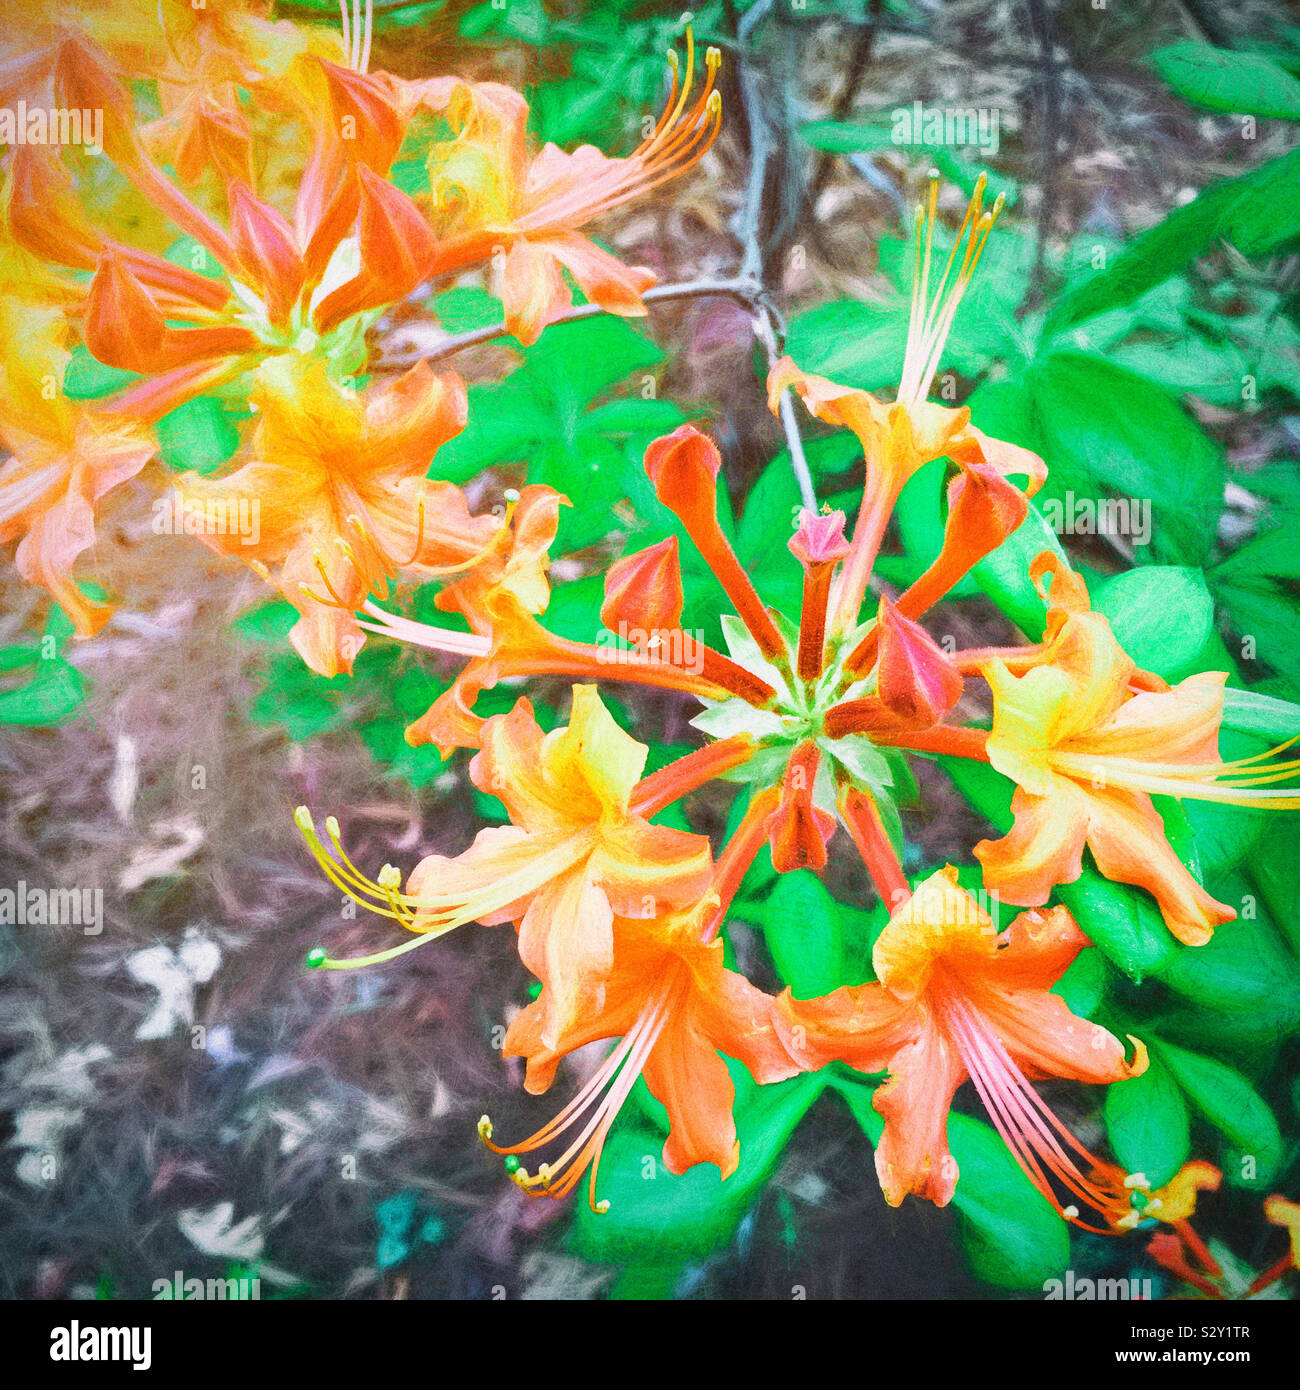 Orange and yellow colored native azalea flower in bloom growing in a shaded woodland garden in the southern USA states. The native azalea is a rhododendron and is a deciduous plant. Stock Photo